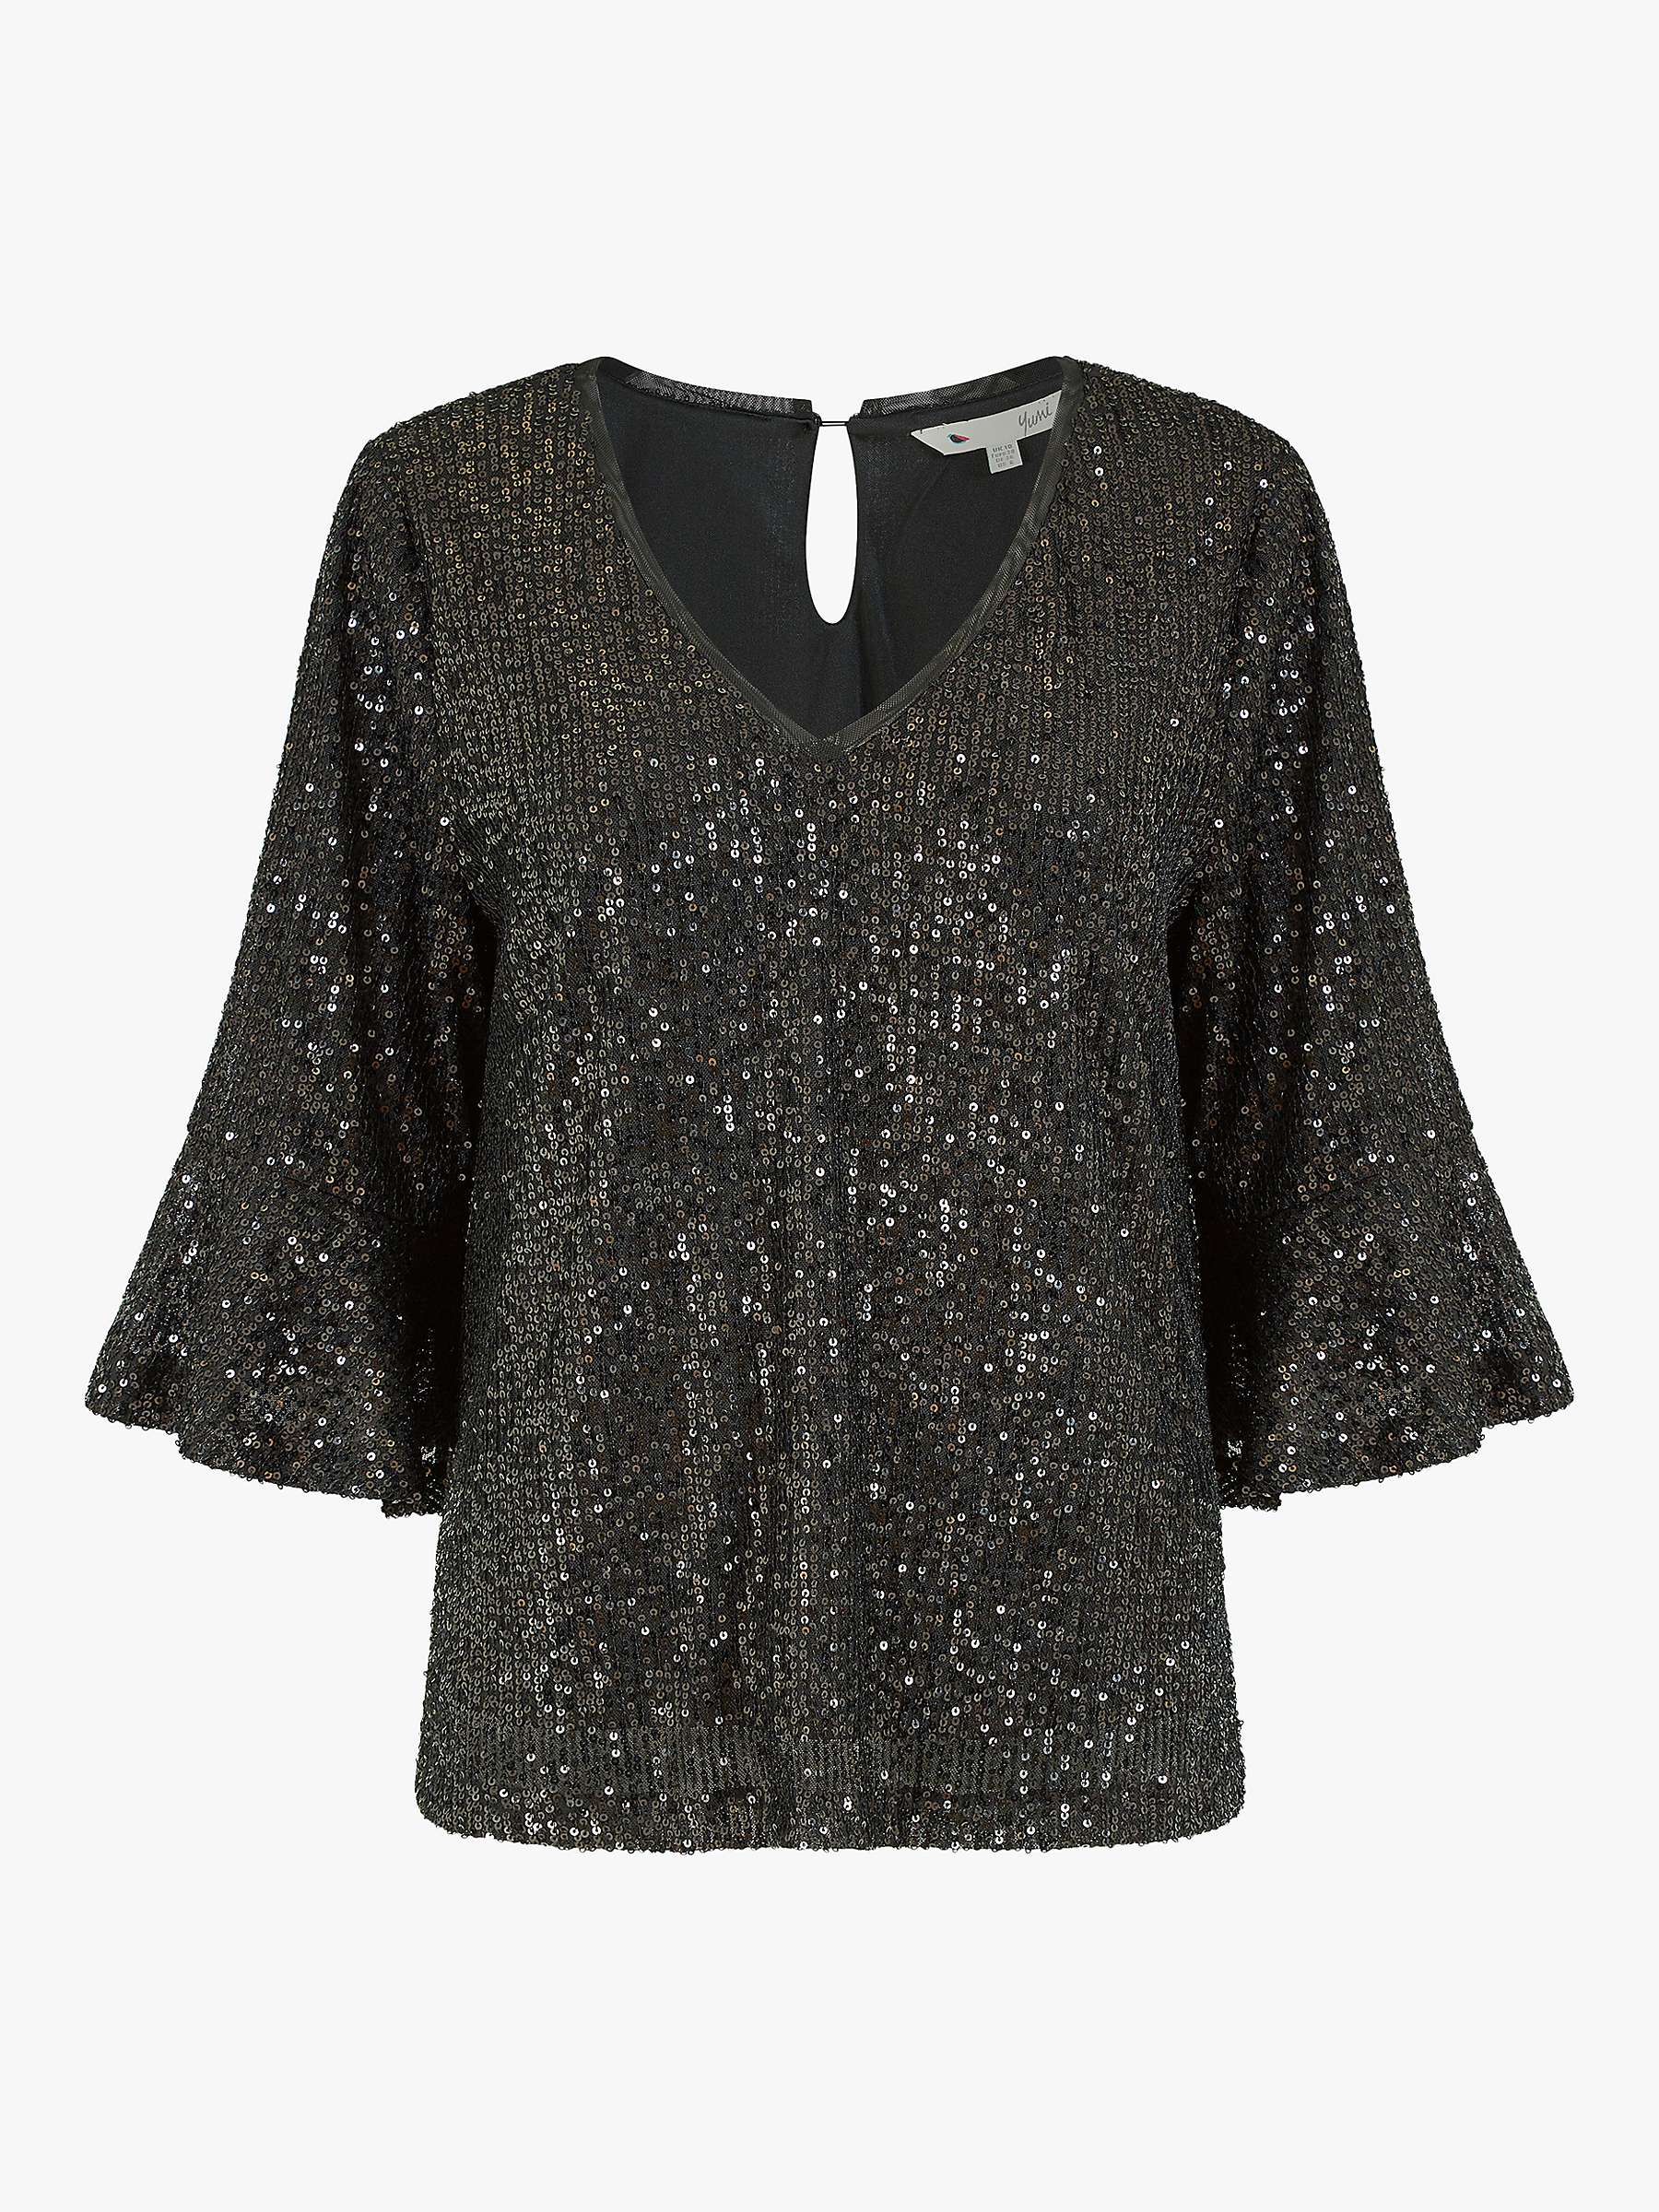 Buy Yumi Sequin Relaxed Fit Top Online at johnlewis.com